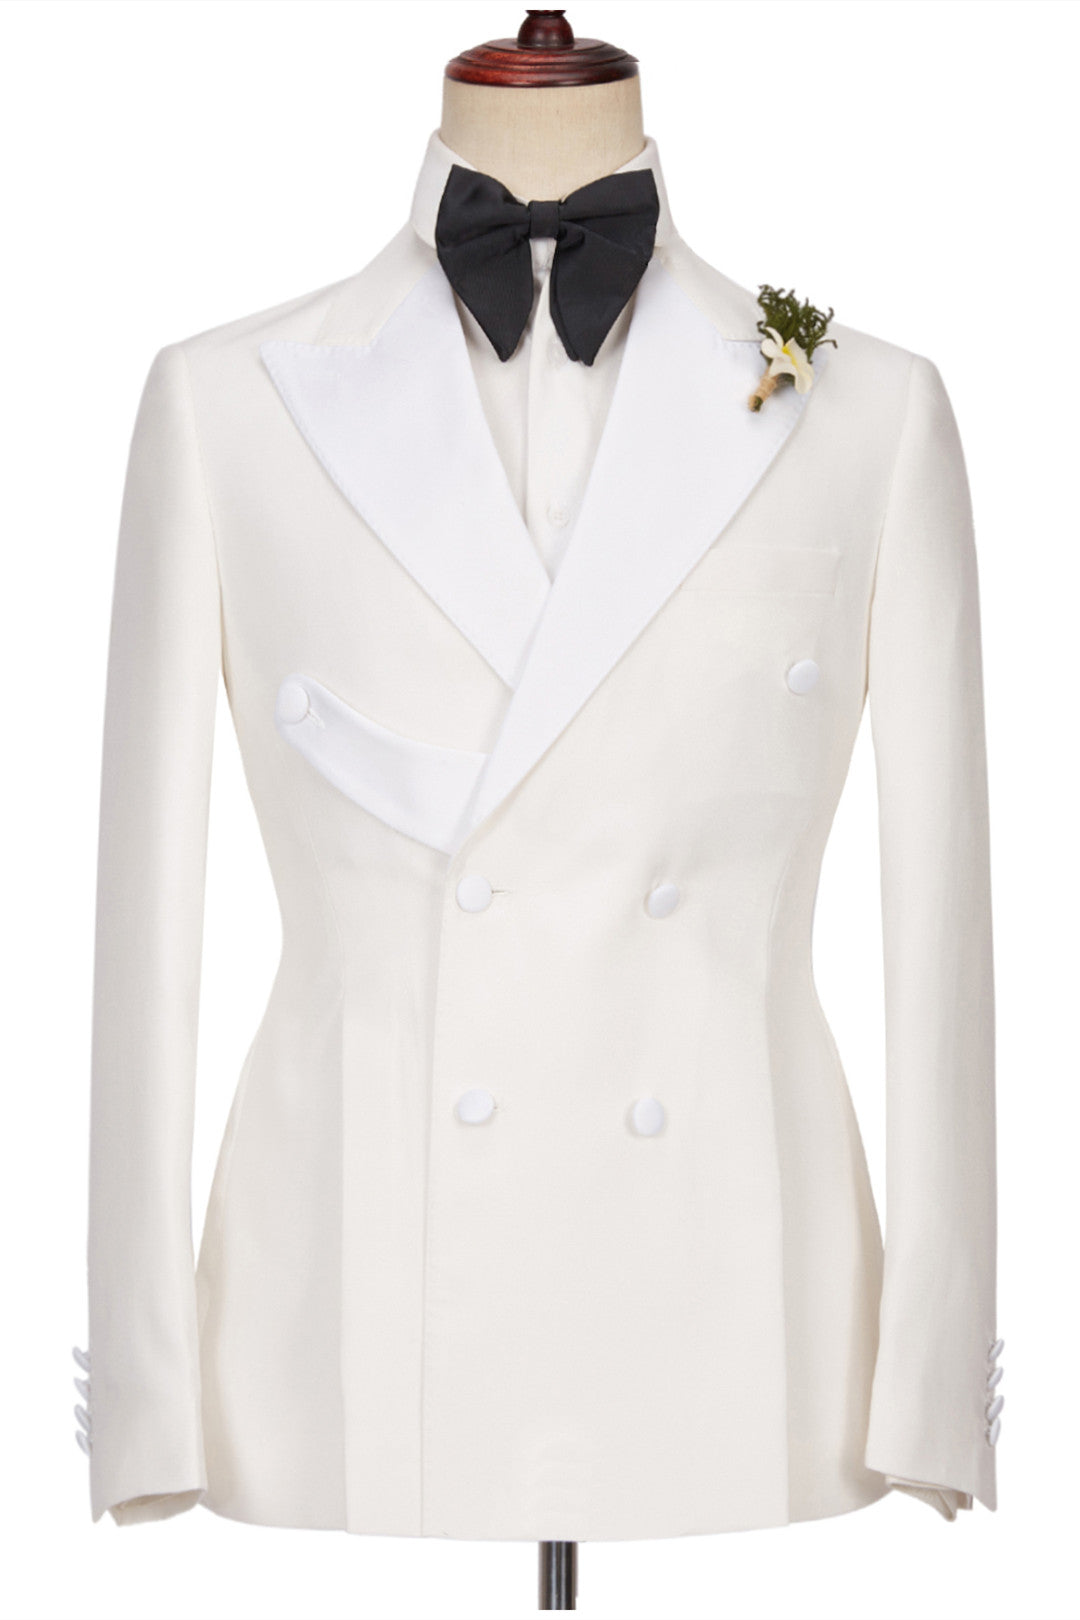 Alejandro Chic White Two-Piece Wedding Suits with Peaked Lapel Double Breasted-Wedding Suits-BallBride